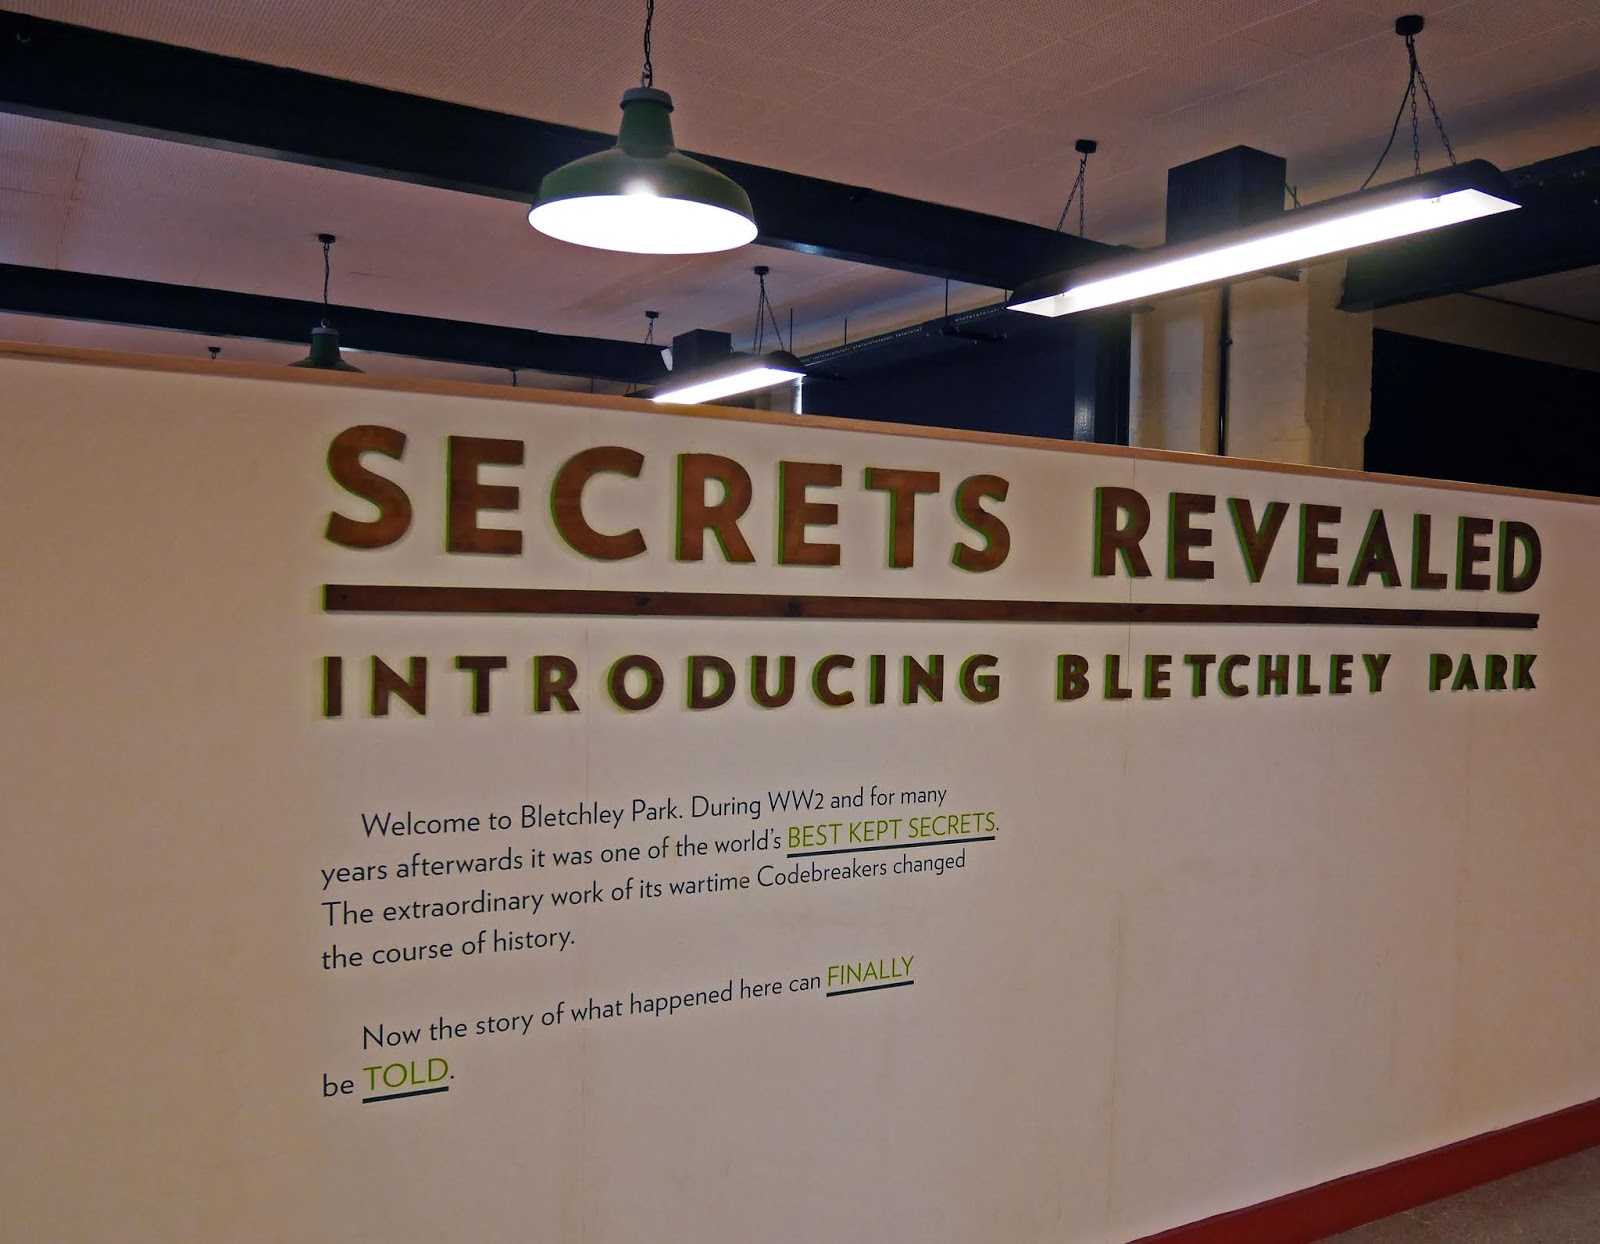 Secrets Revealed: introductory exhibition at Bletchley Park